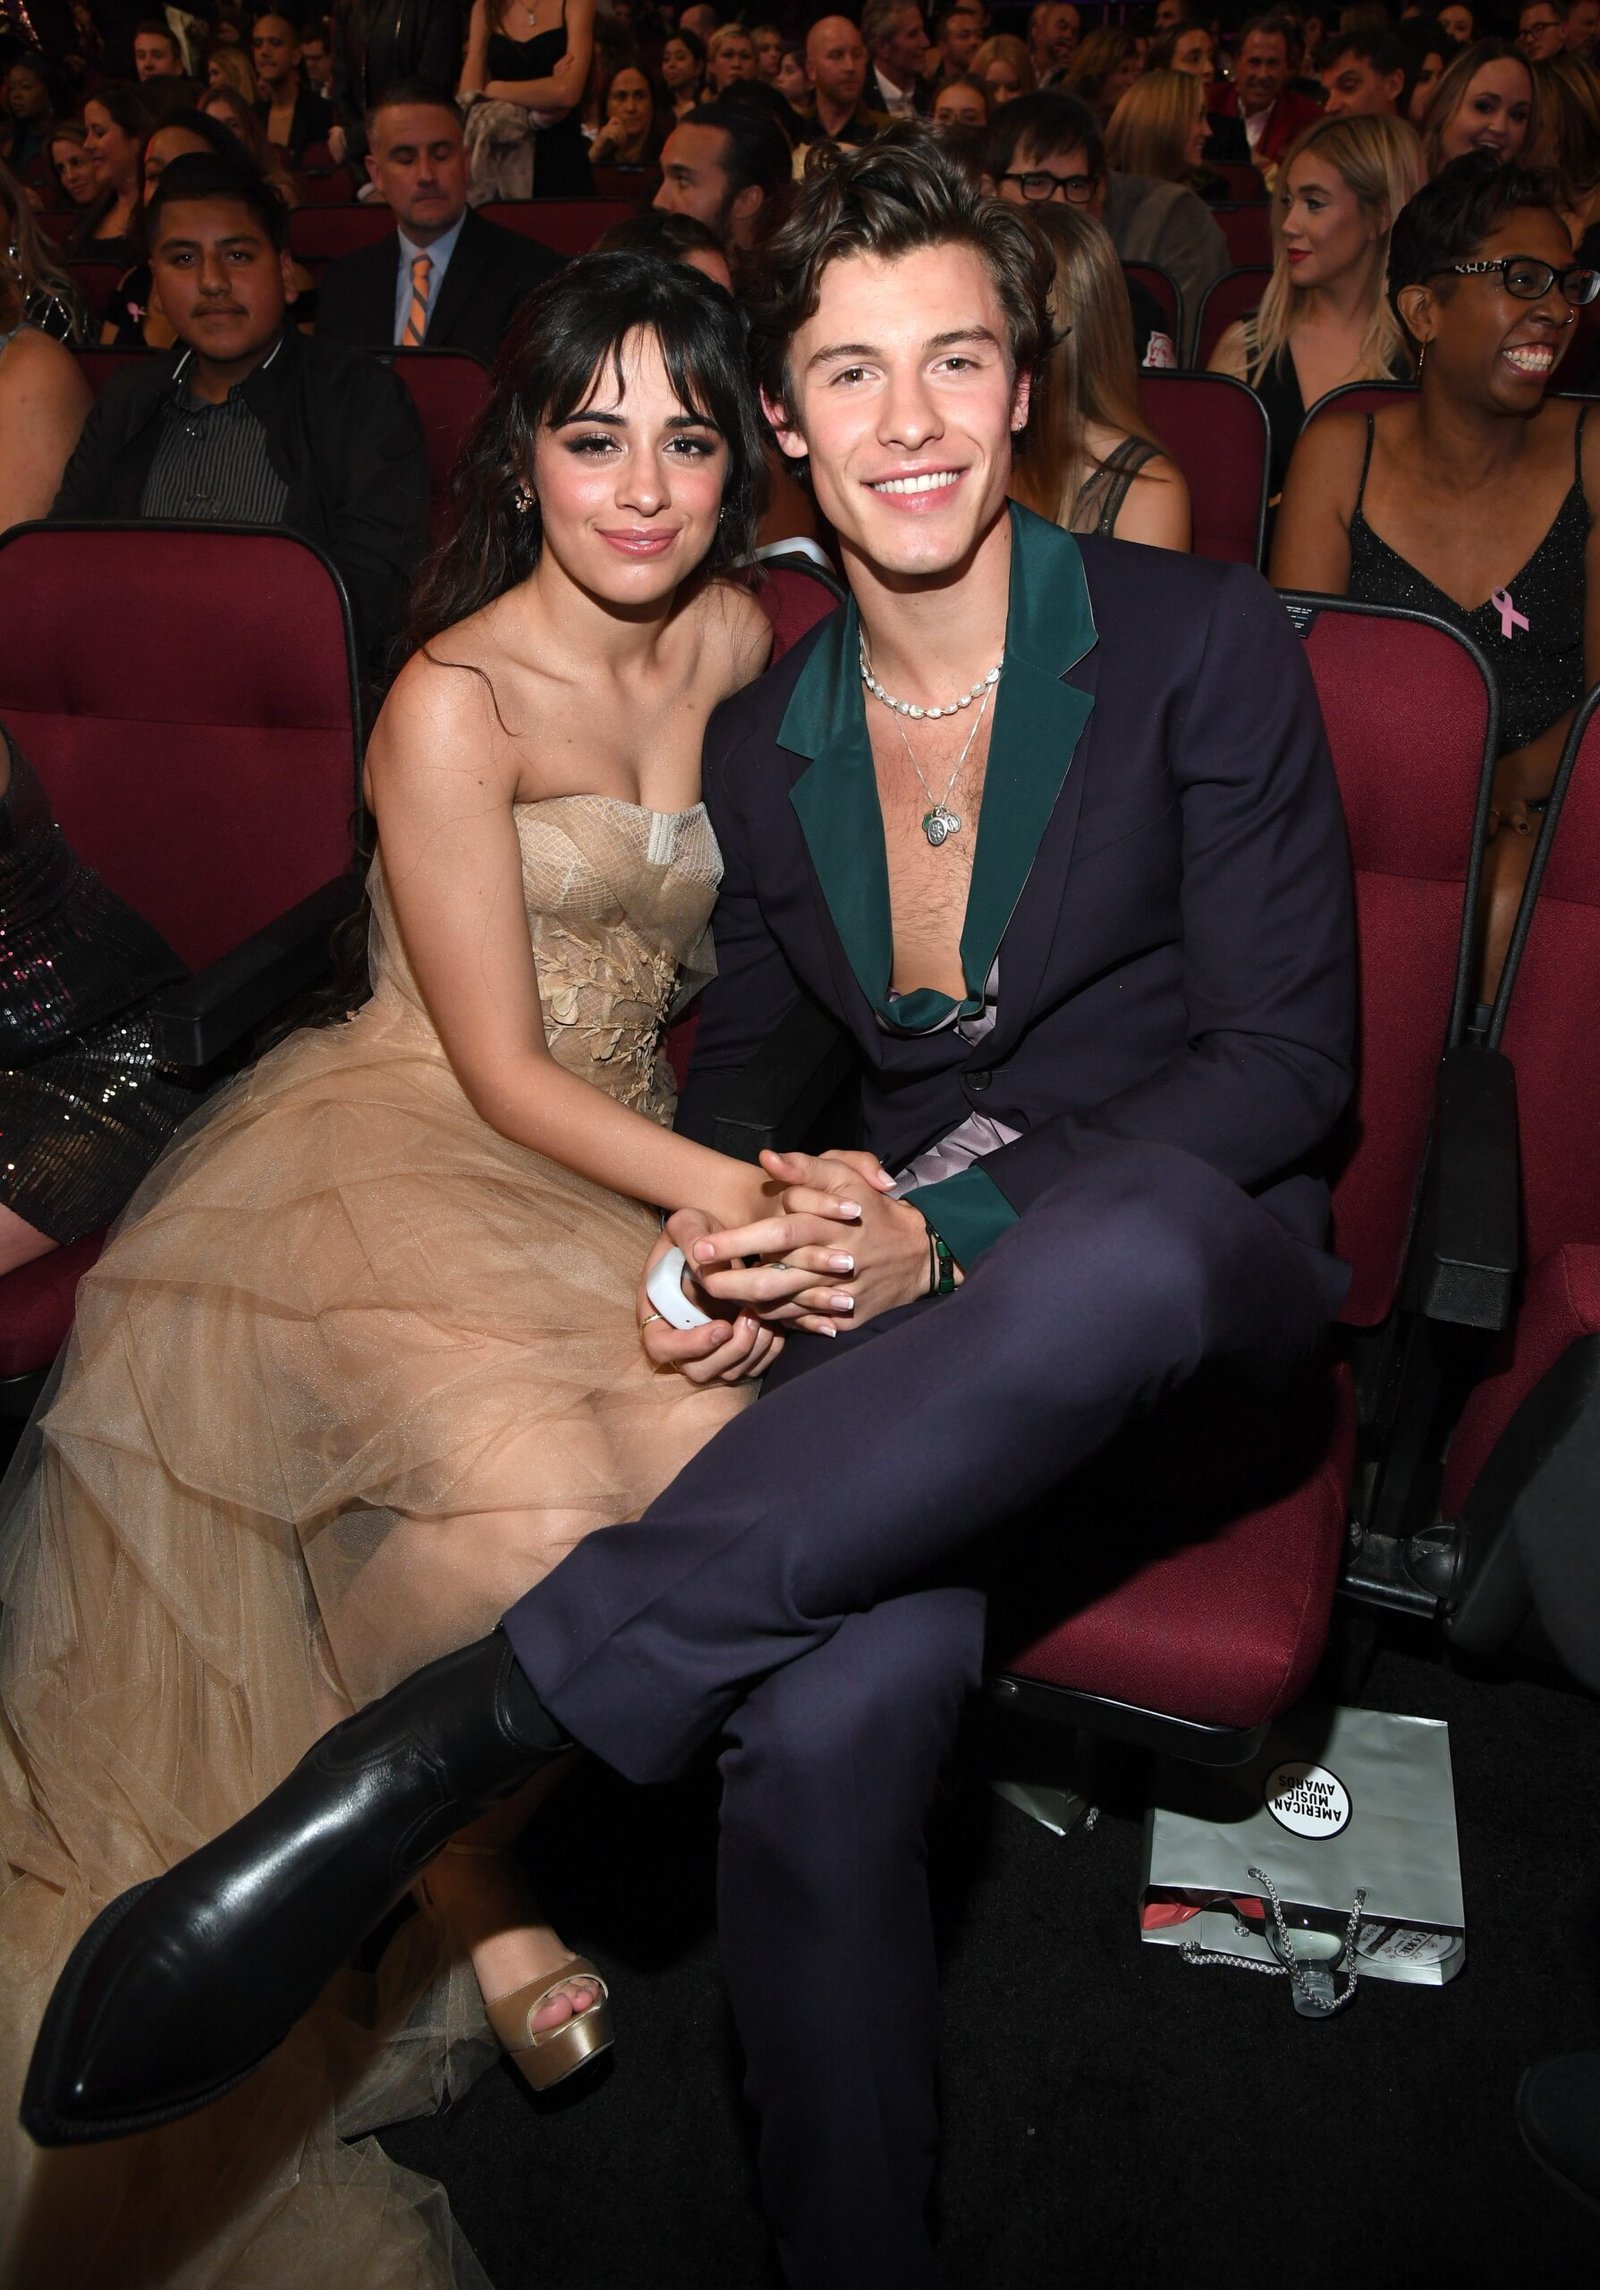 Camila Cabello’s Novel Track No doubt Sounds Enjoy It’s About Her Ex, Shawn Mendes